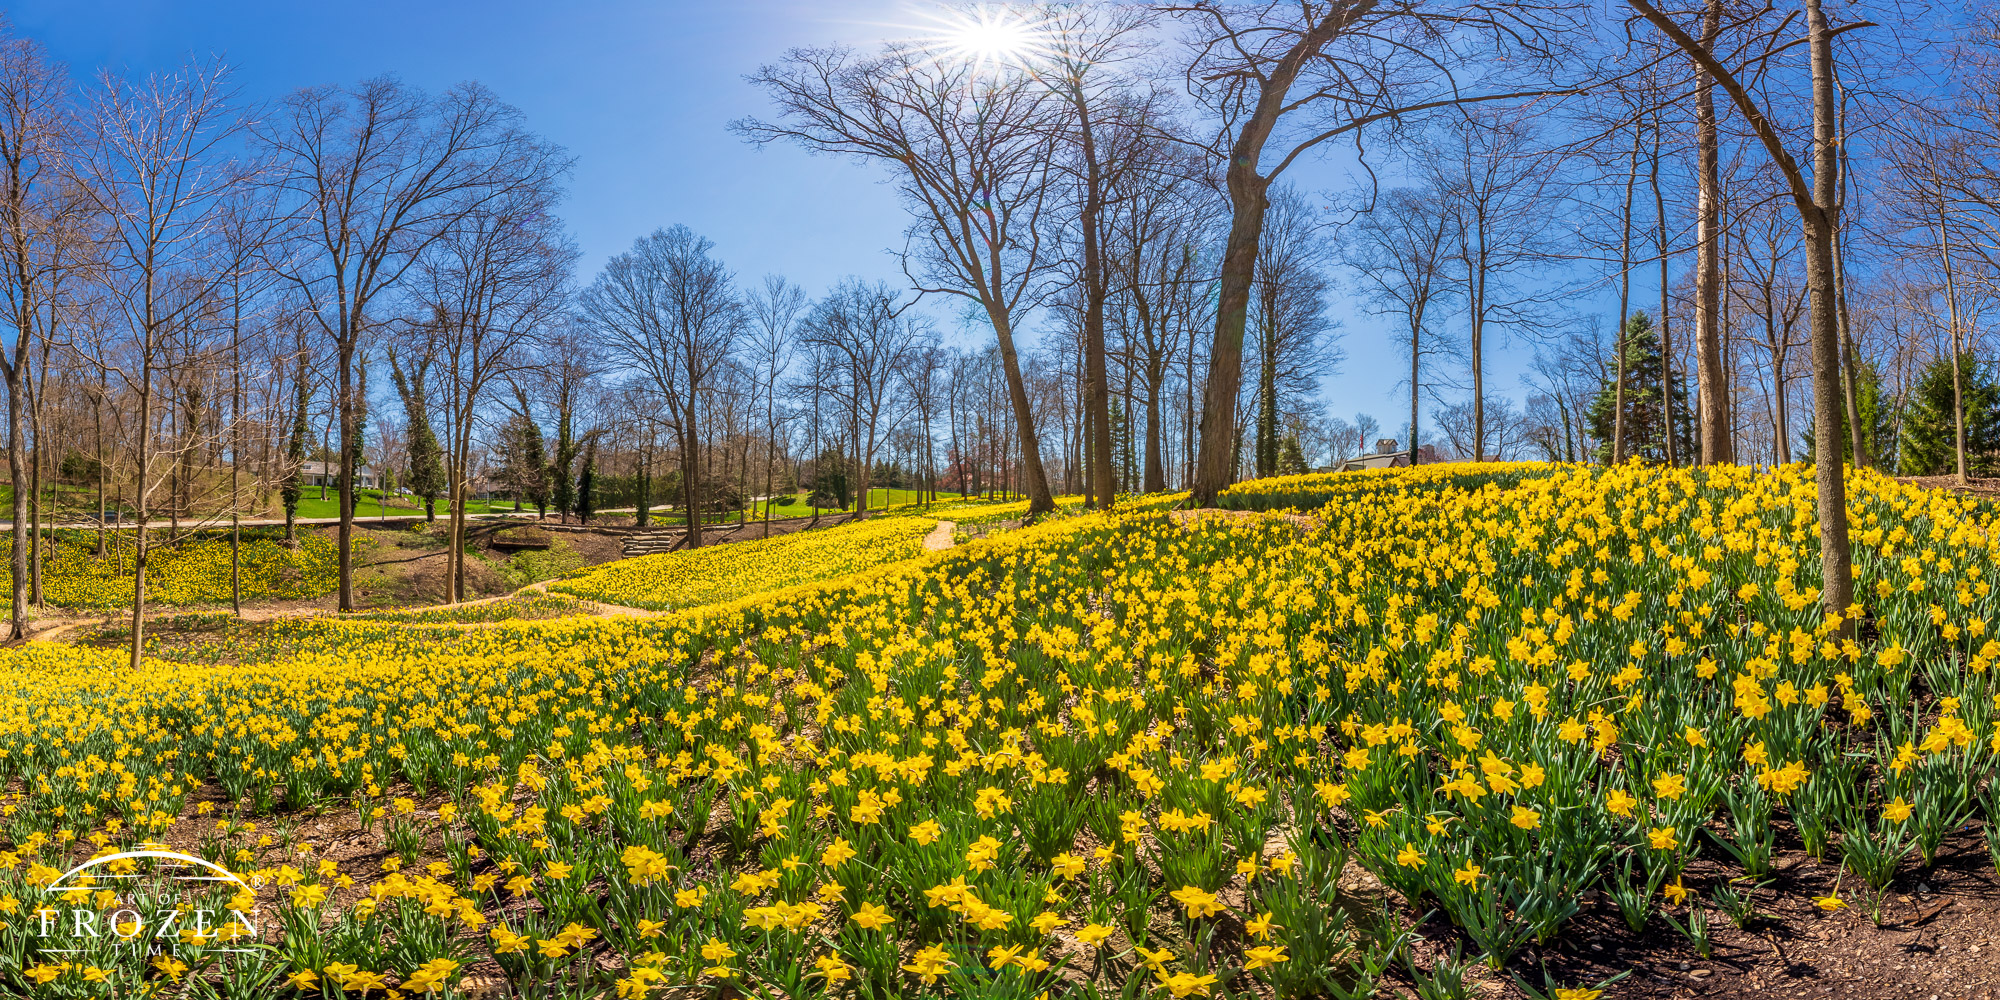 A panorama view of an Oakwood, Ohio, front yard featuring 160,000 daffodils in peak bloom among its rolling hills